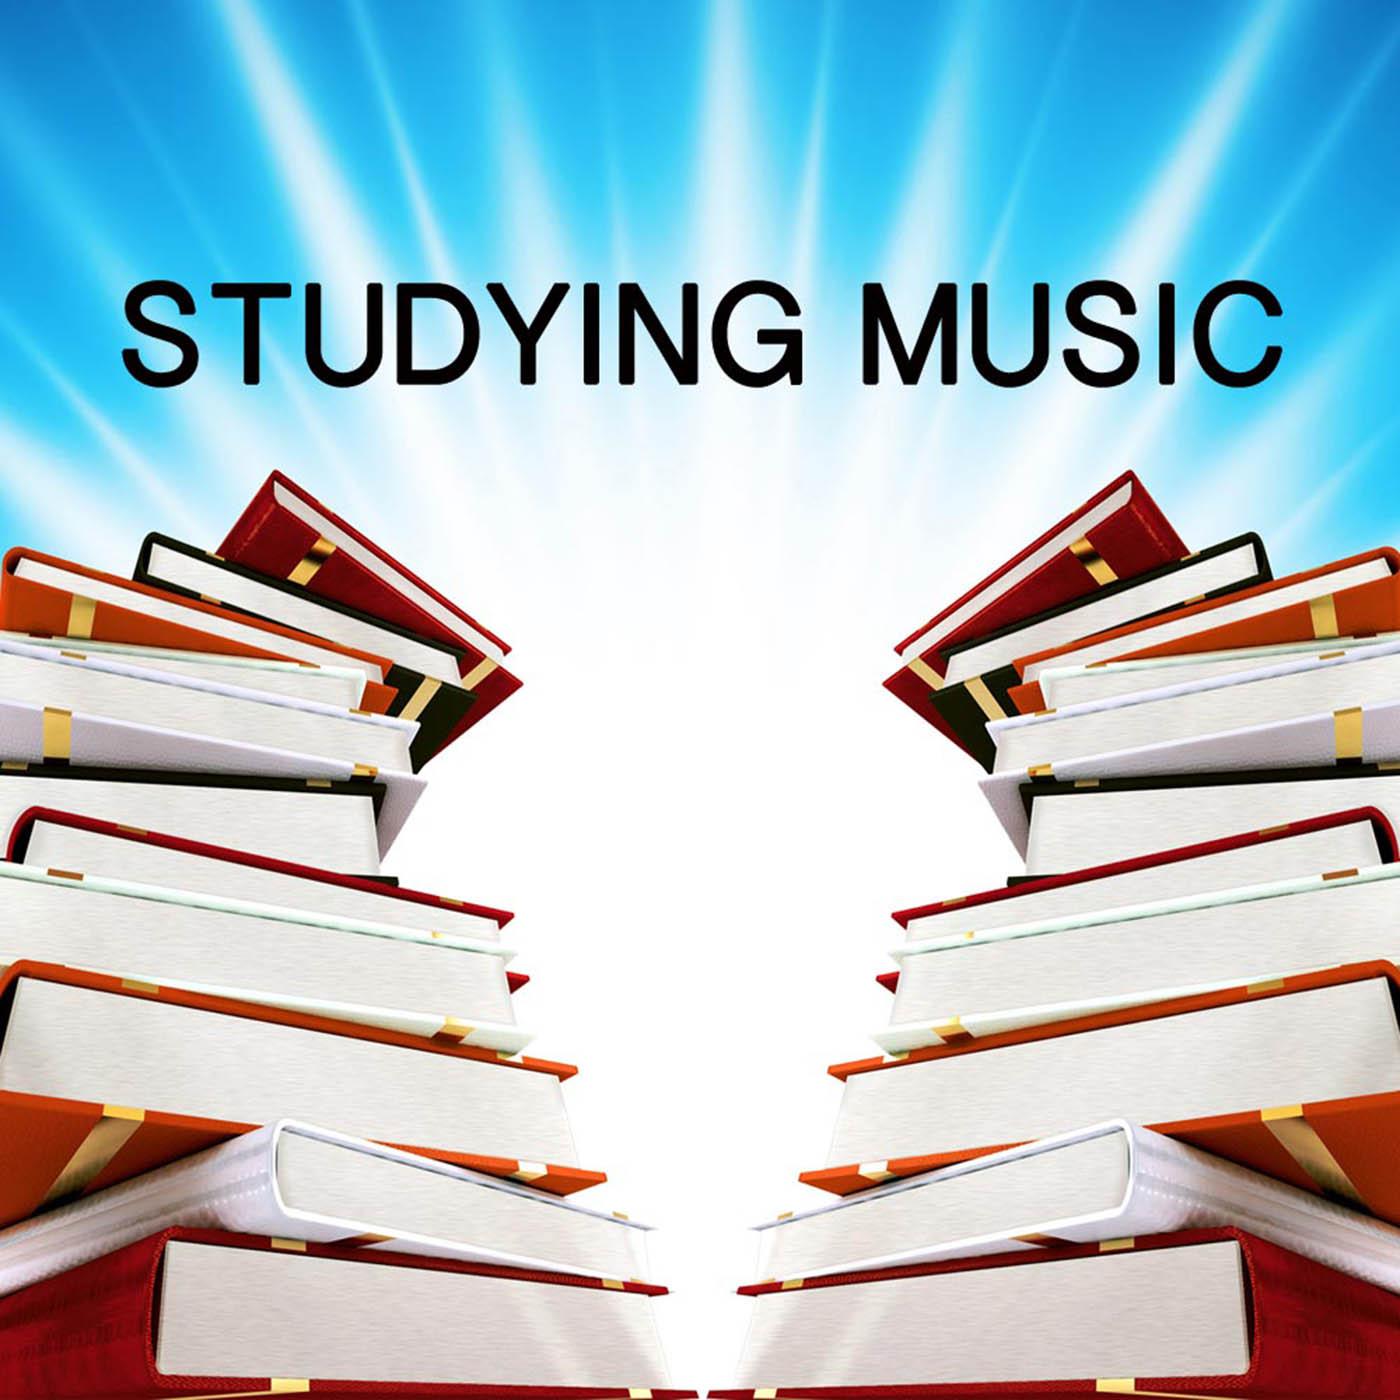 Piano Music for Reading